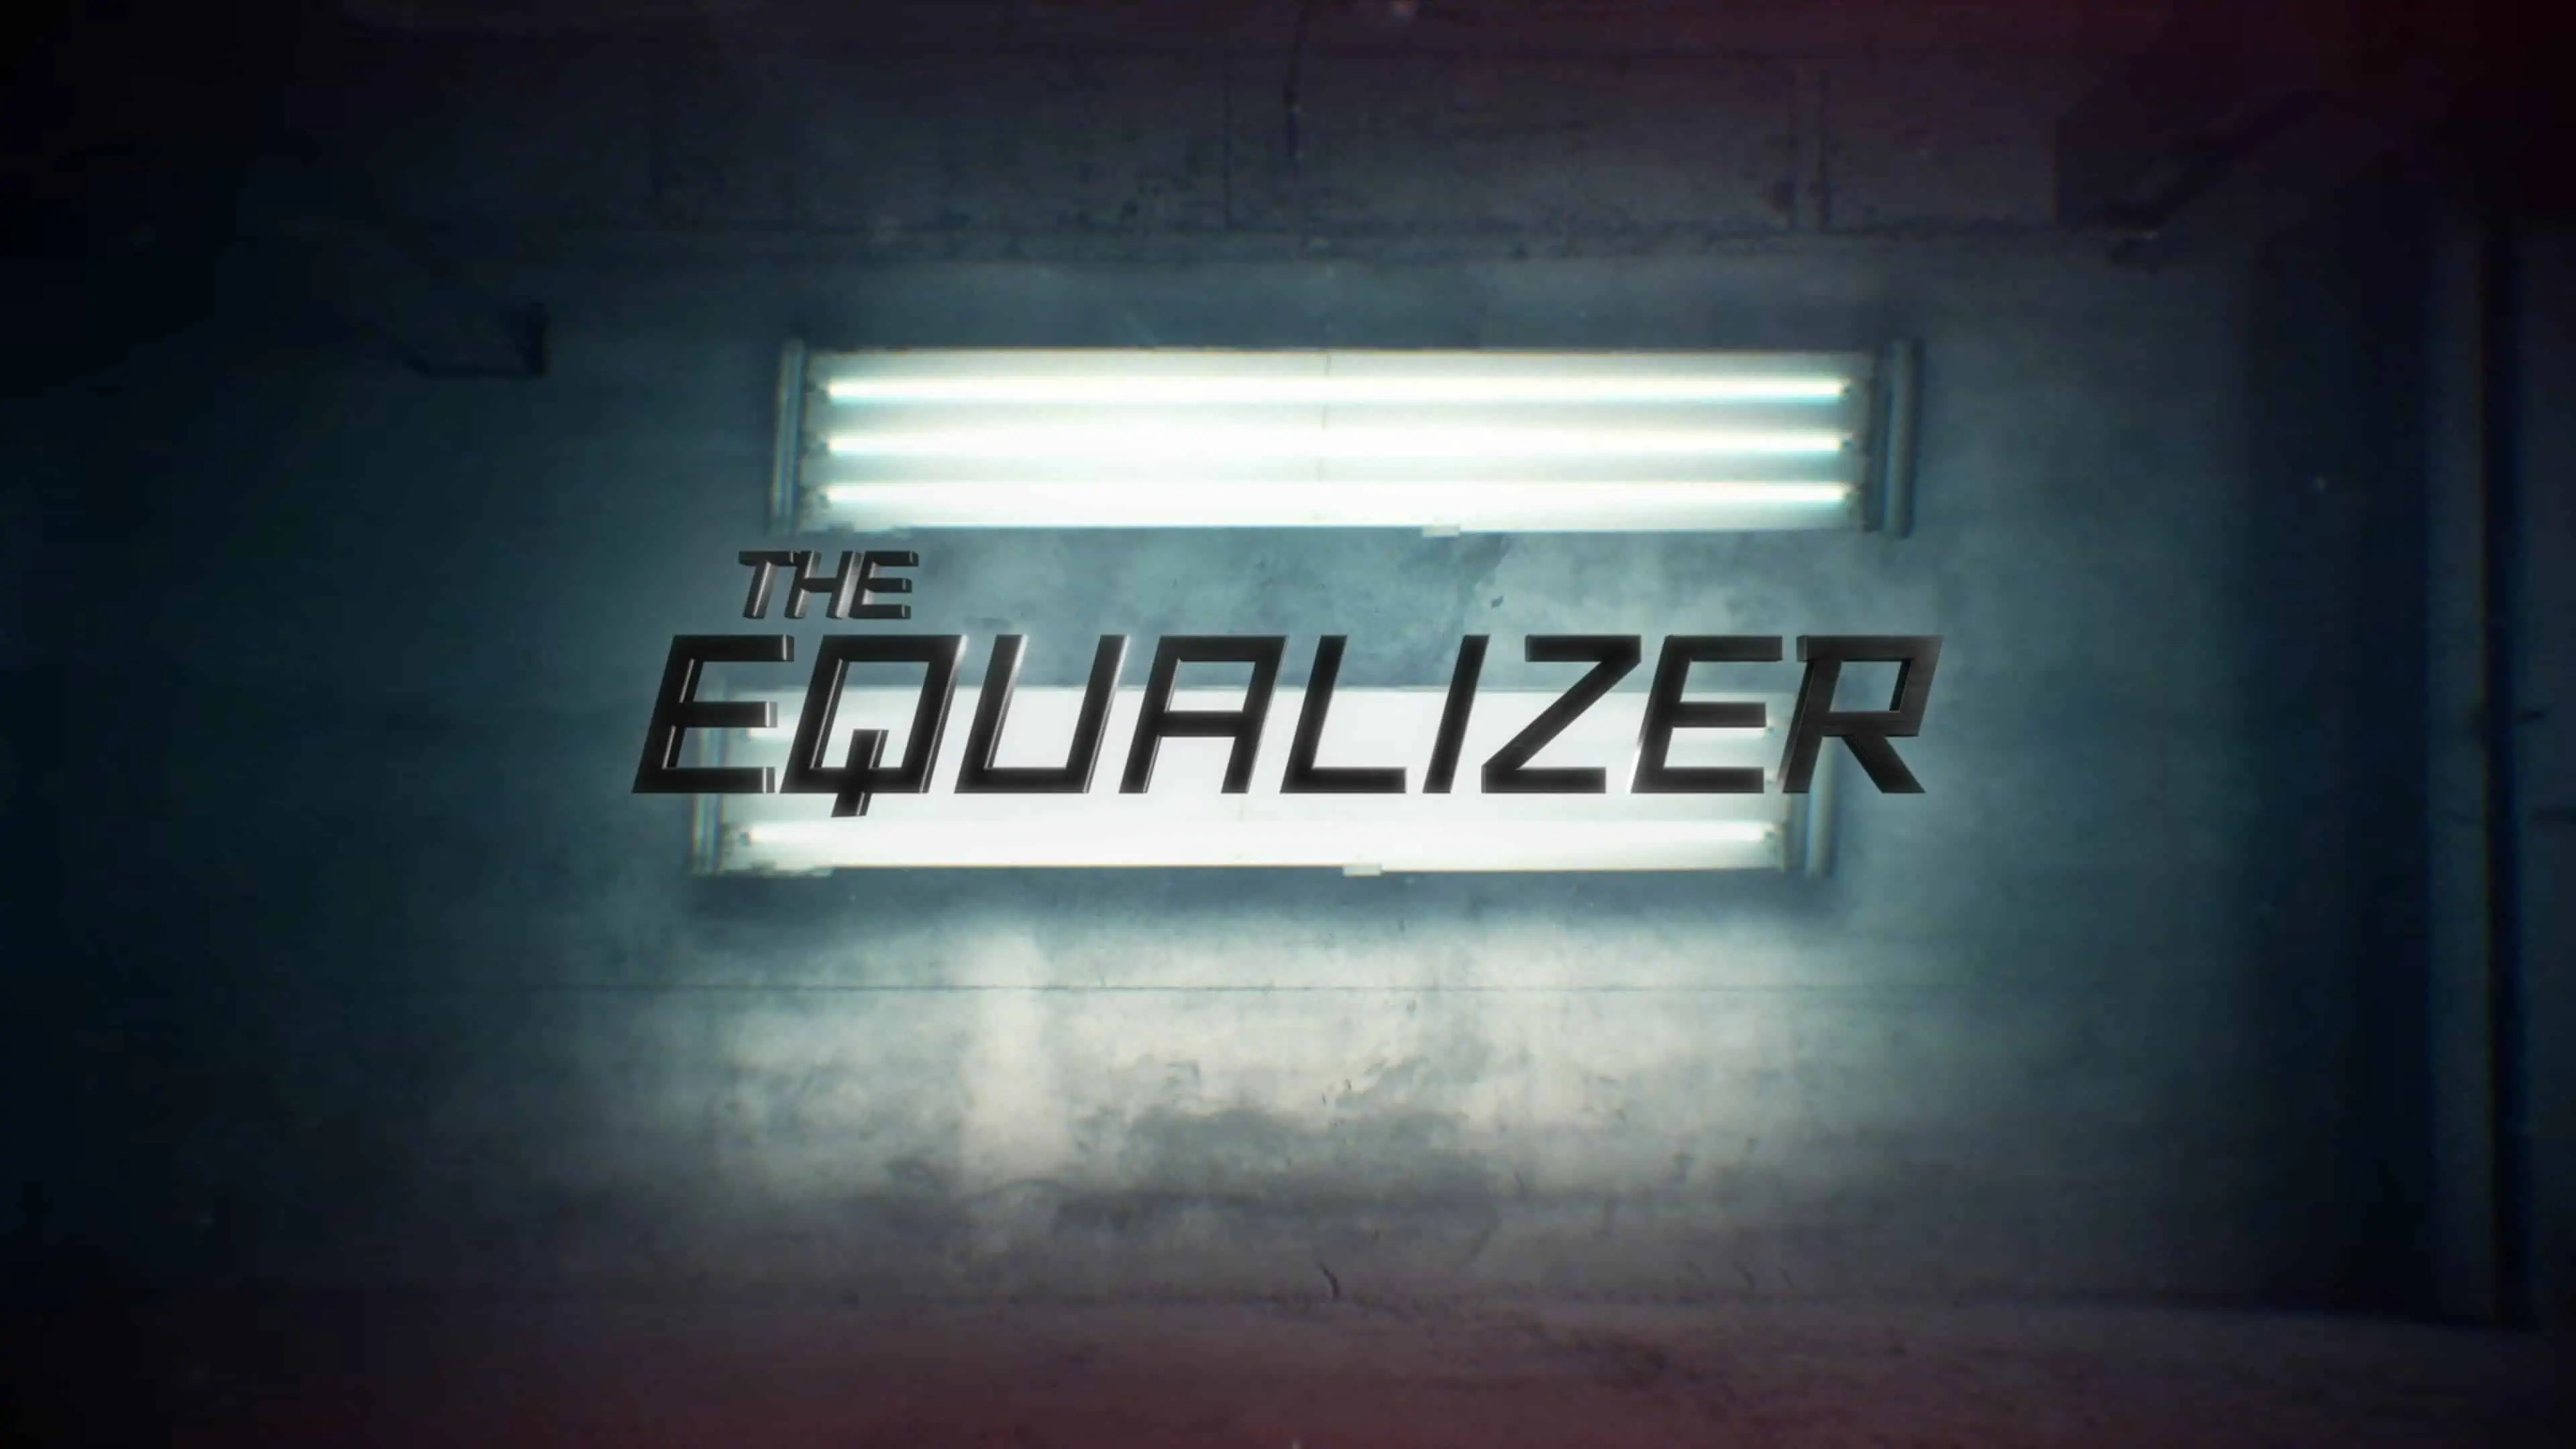 Alternate Title Card for The Equalizer